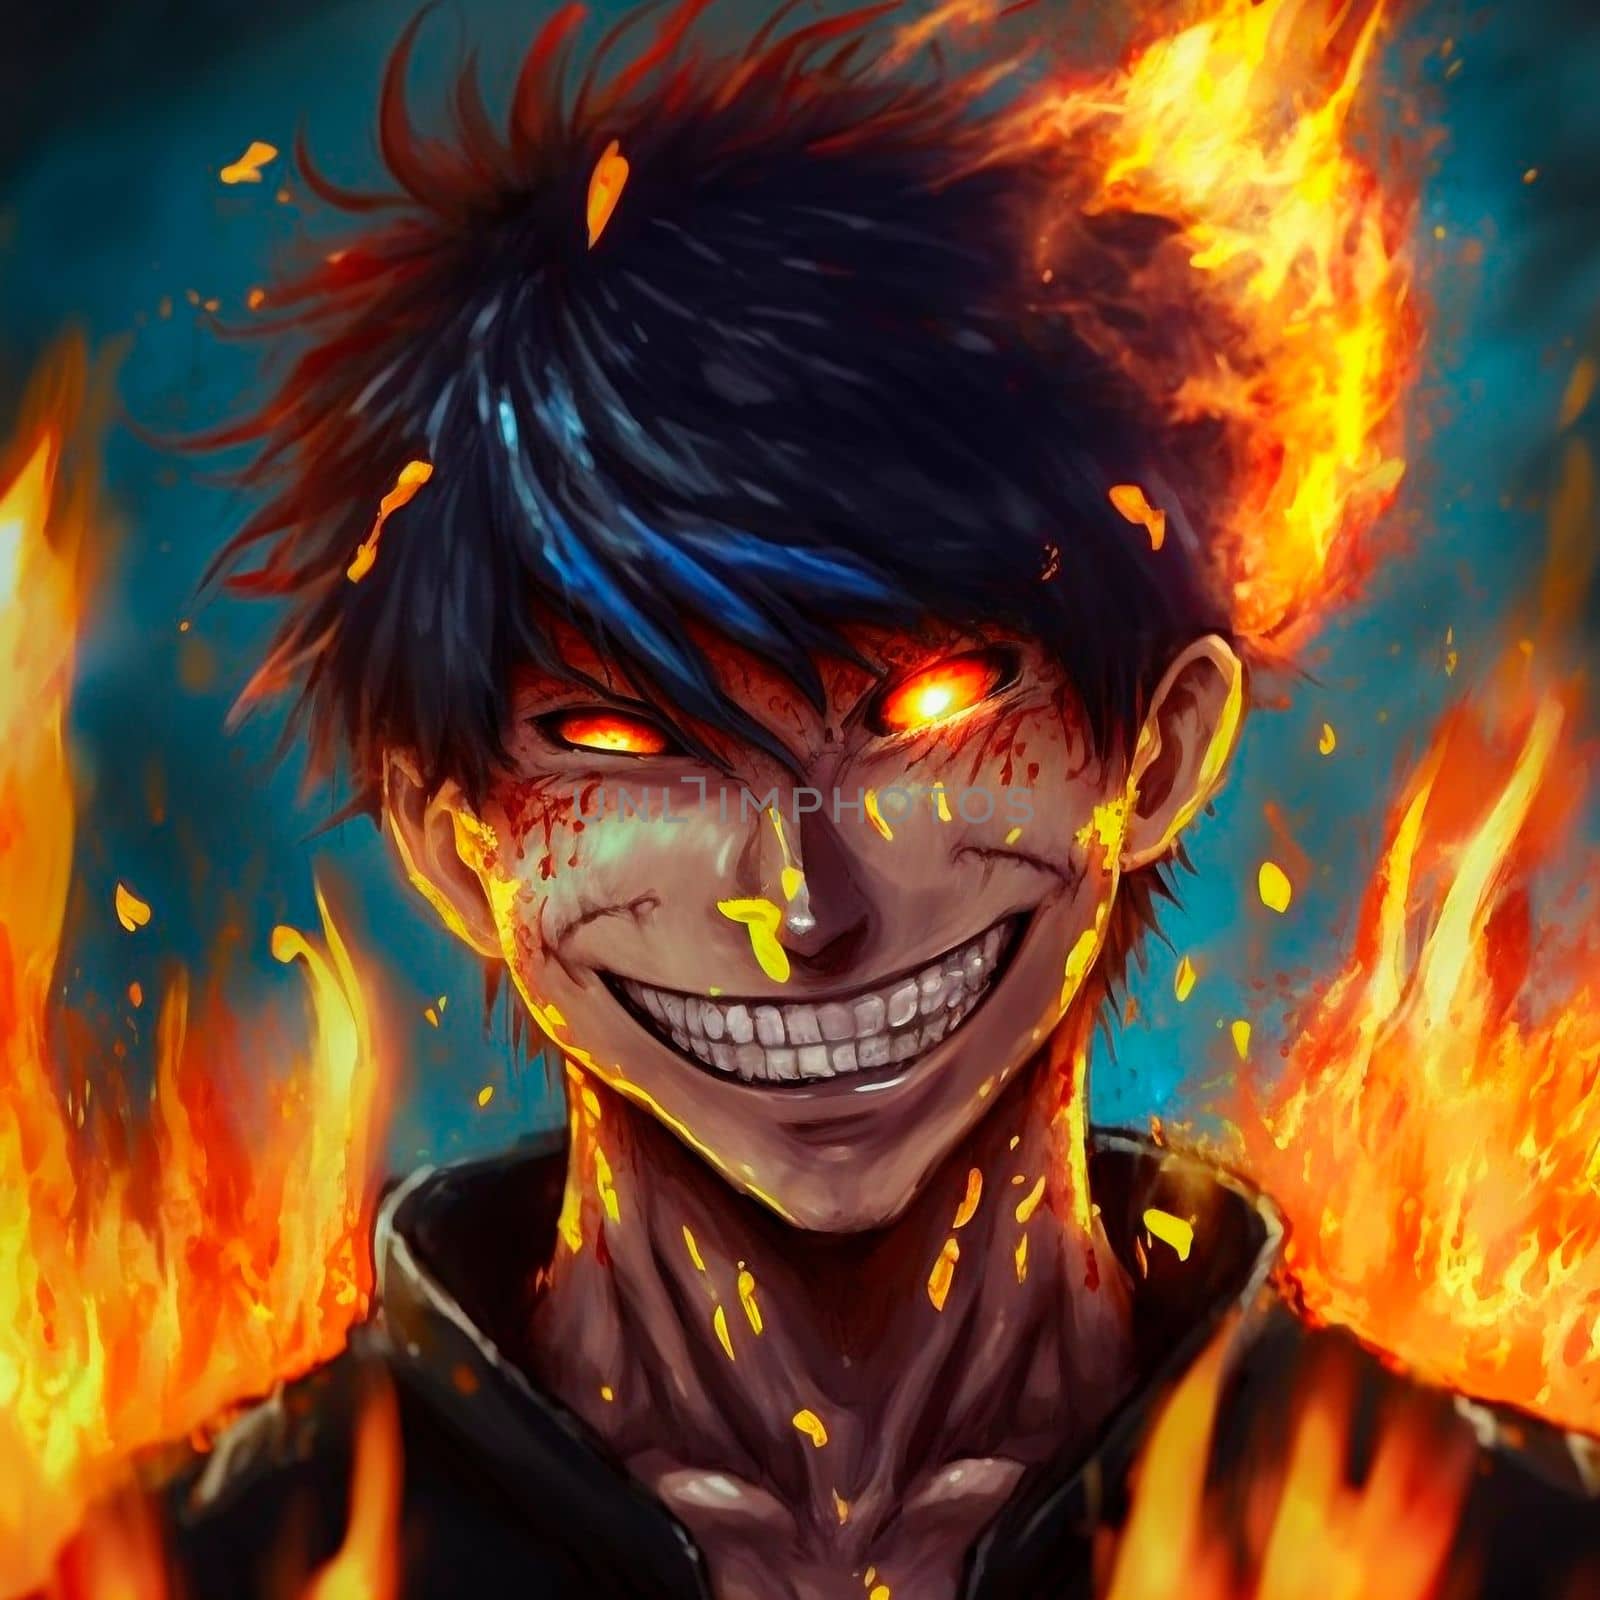 A sinister man engulfed in flames. High quality illustration